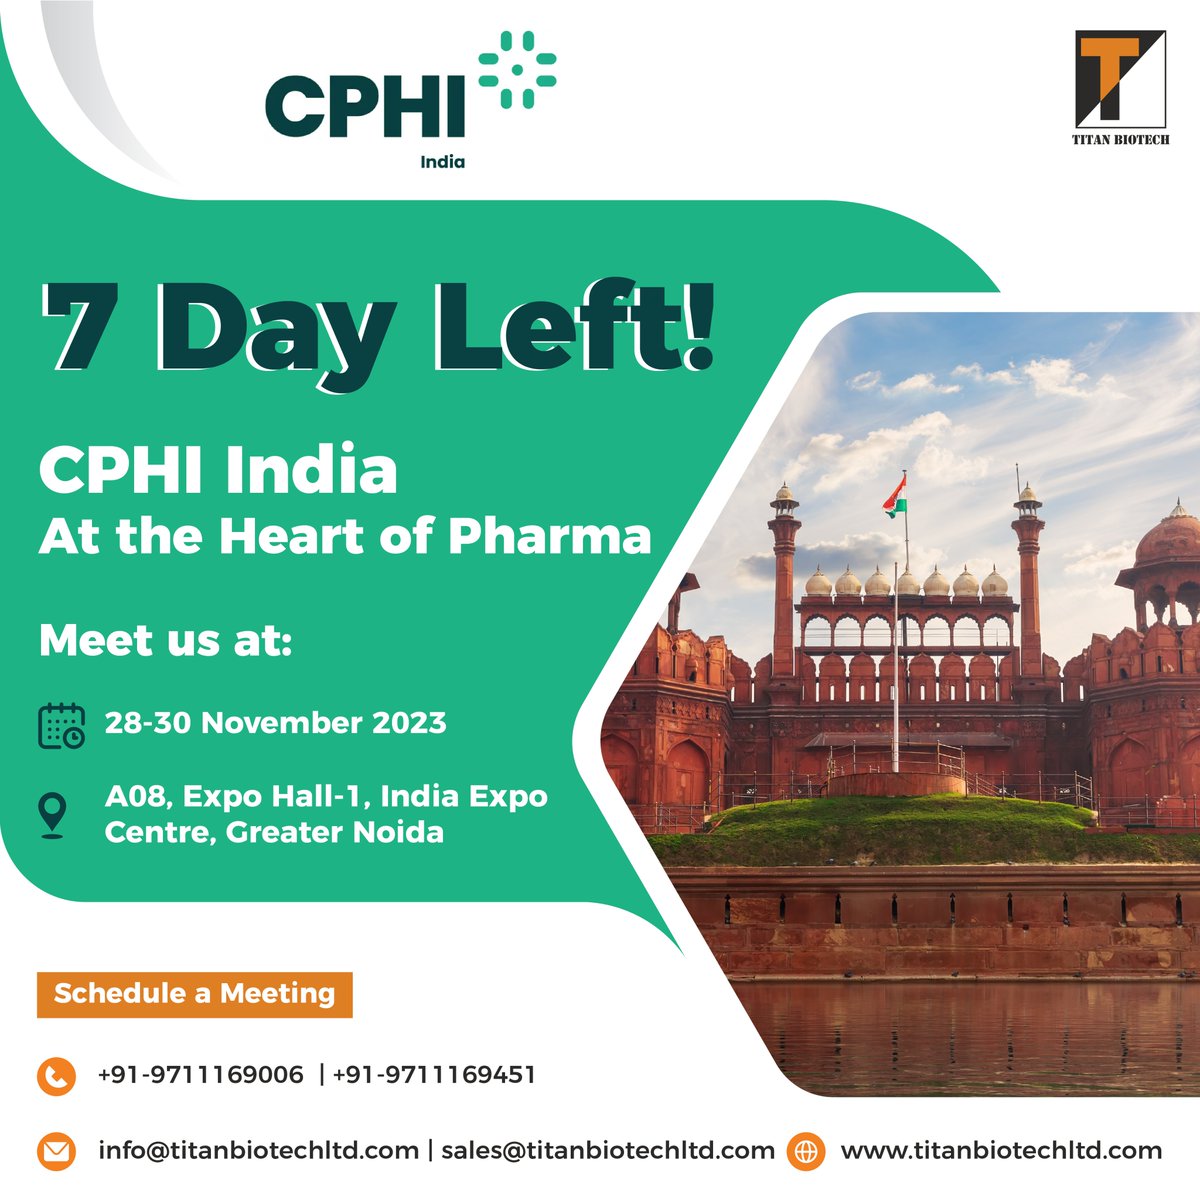 The countdown to #CPHIIndia begins.

Don't miss this opportunity to explore our latest offerings.

Stand A08, Expo Hall-1, India Expo Centre, Greater Noida, November 28-30, 2023

Schedule a Meeting
+91-9711169006, +91-9711169451
 info@titanbiotechltd.com
sales@titanbiotechltd.com